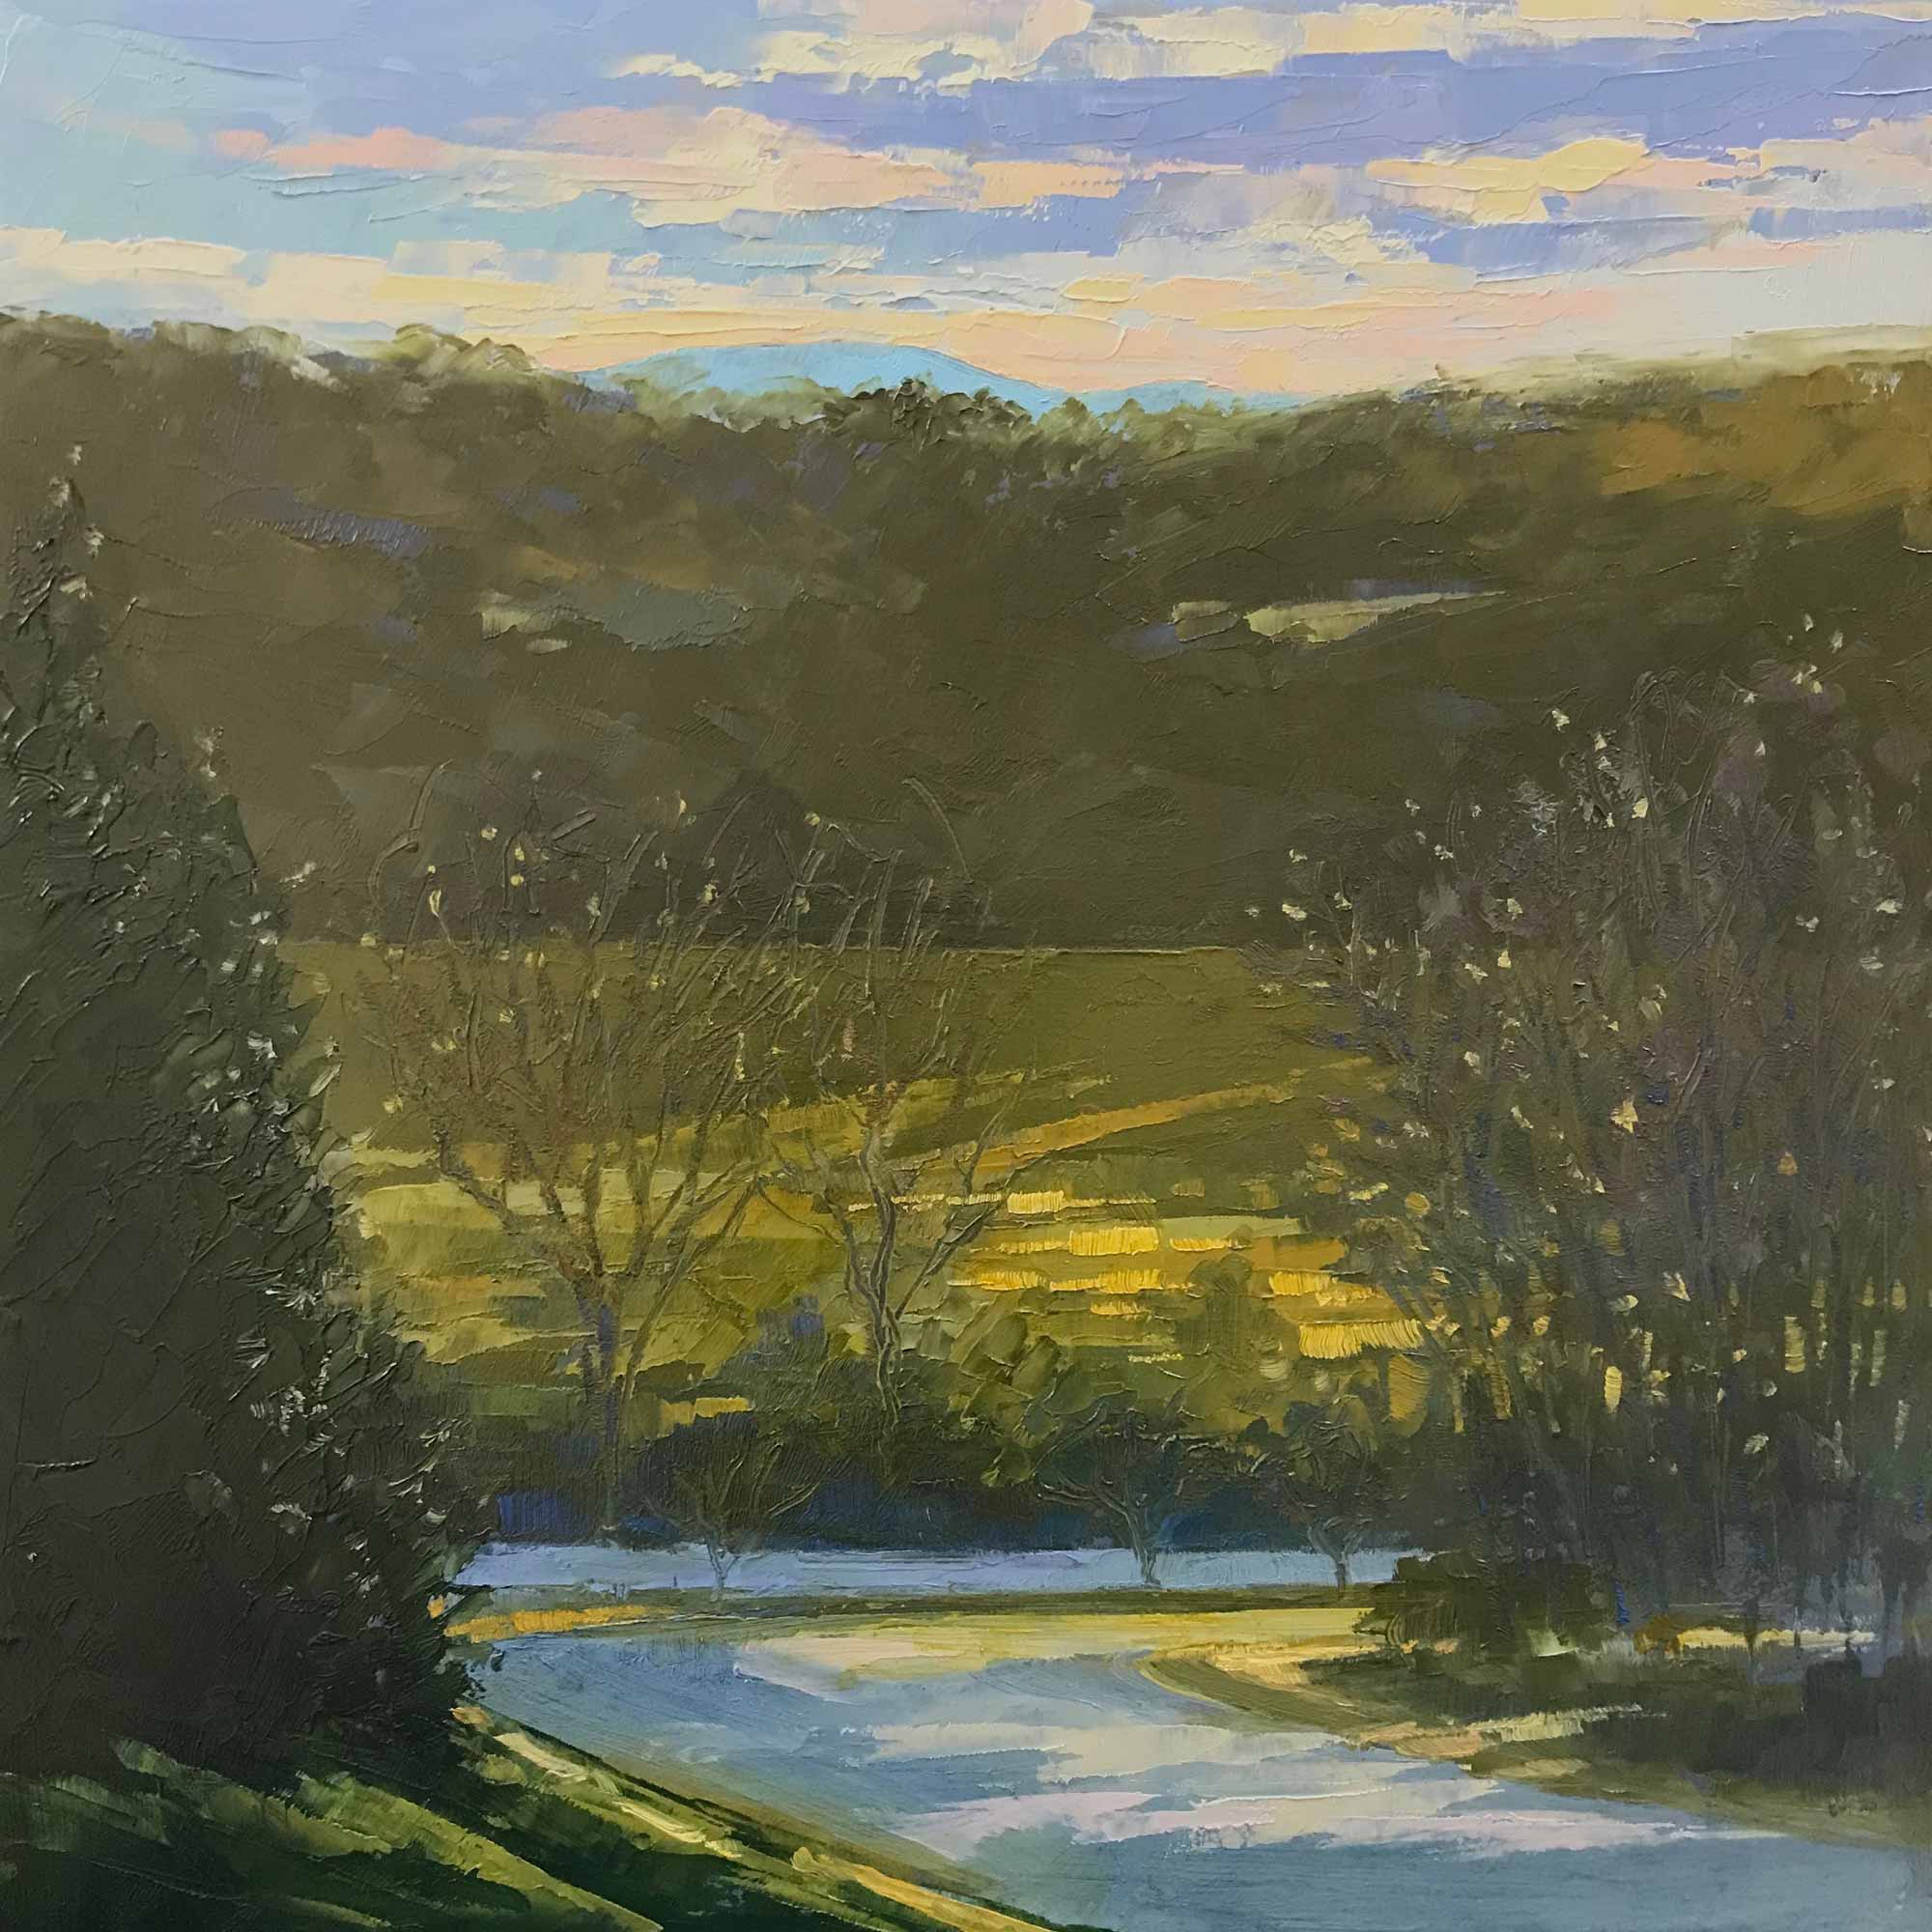 View from the Ridge No. 85, oil on panel, 8 x 8 inches, 2019